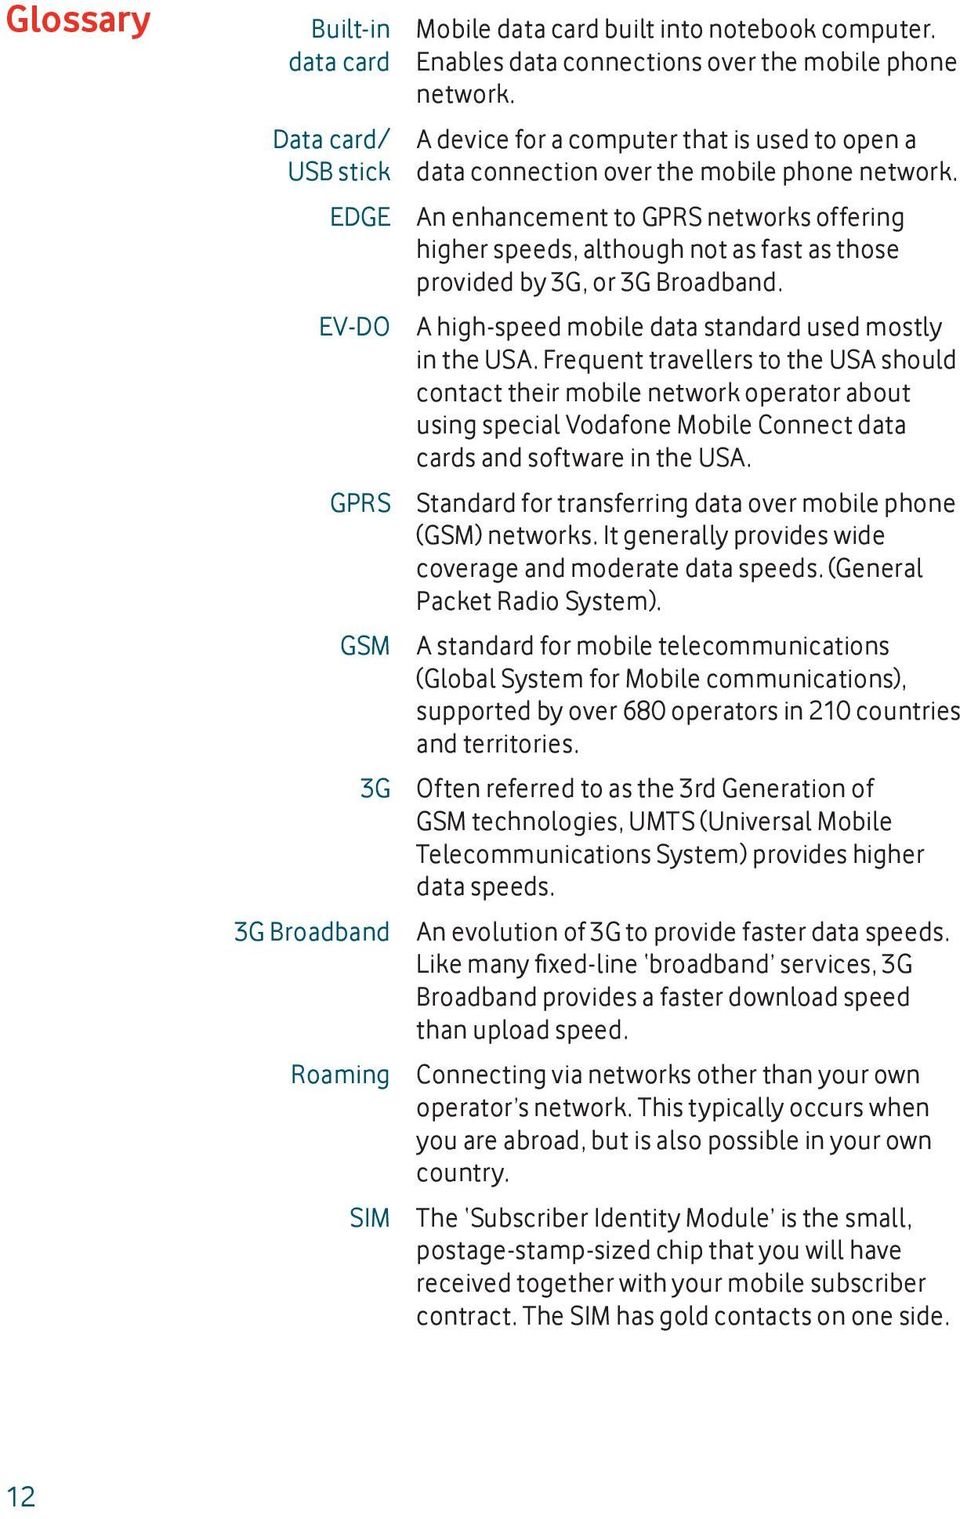 An enhancement to GPRS networks offering higher speeds, although not as fast as those provided by 3G, or 3G Broadband. A high-speed mobile data standard used mostly in the USA.